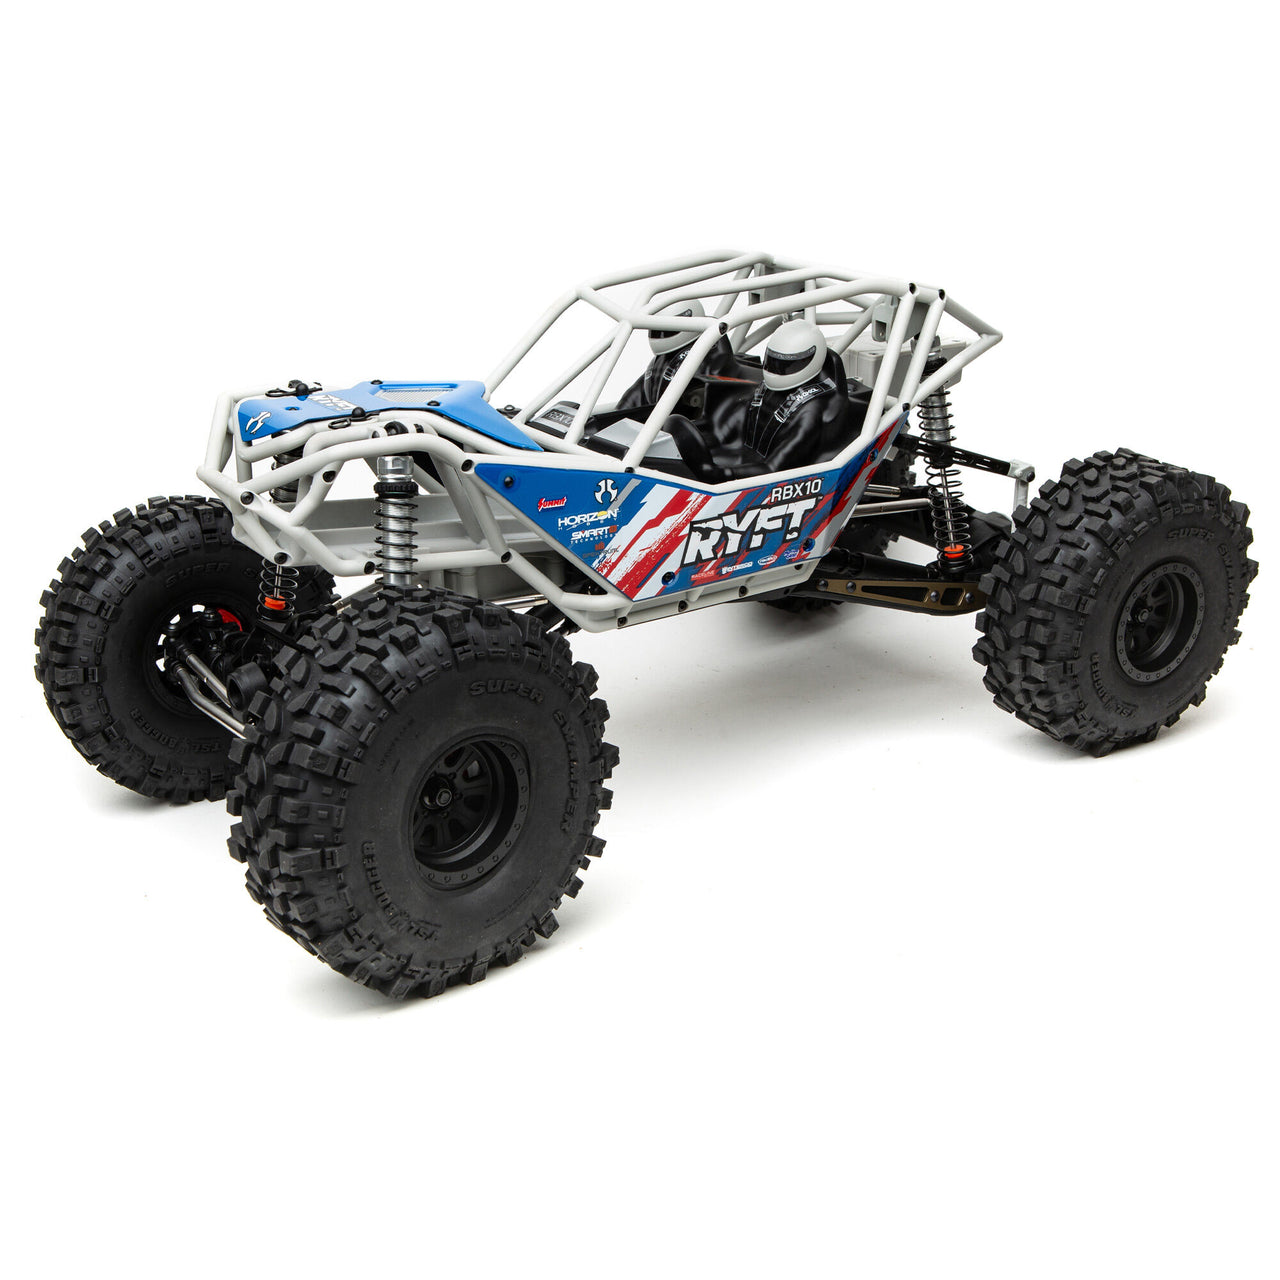 AXI03009 1/10 RBX10 Ryft 4WD Rock Bouncer Kit, Gray Axial Adventure